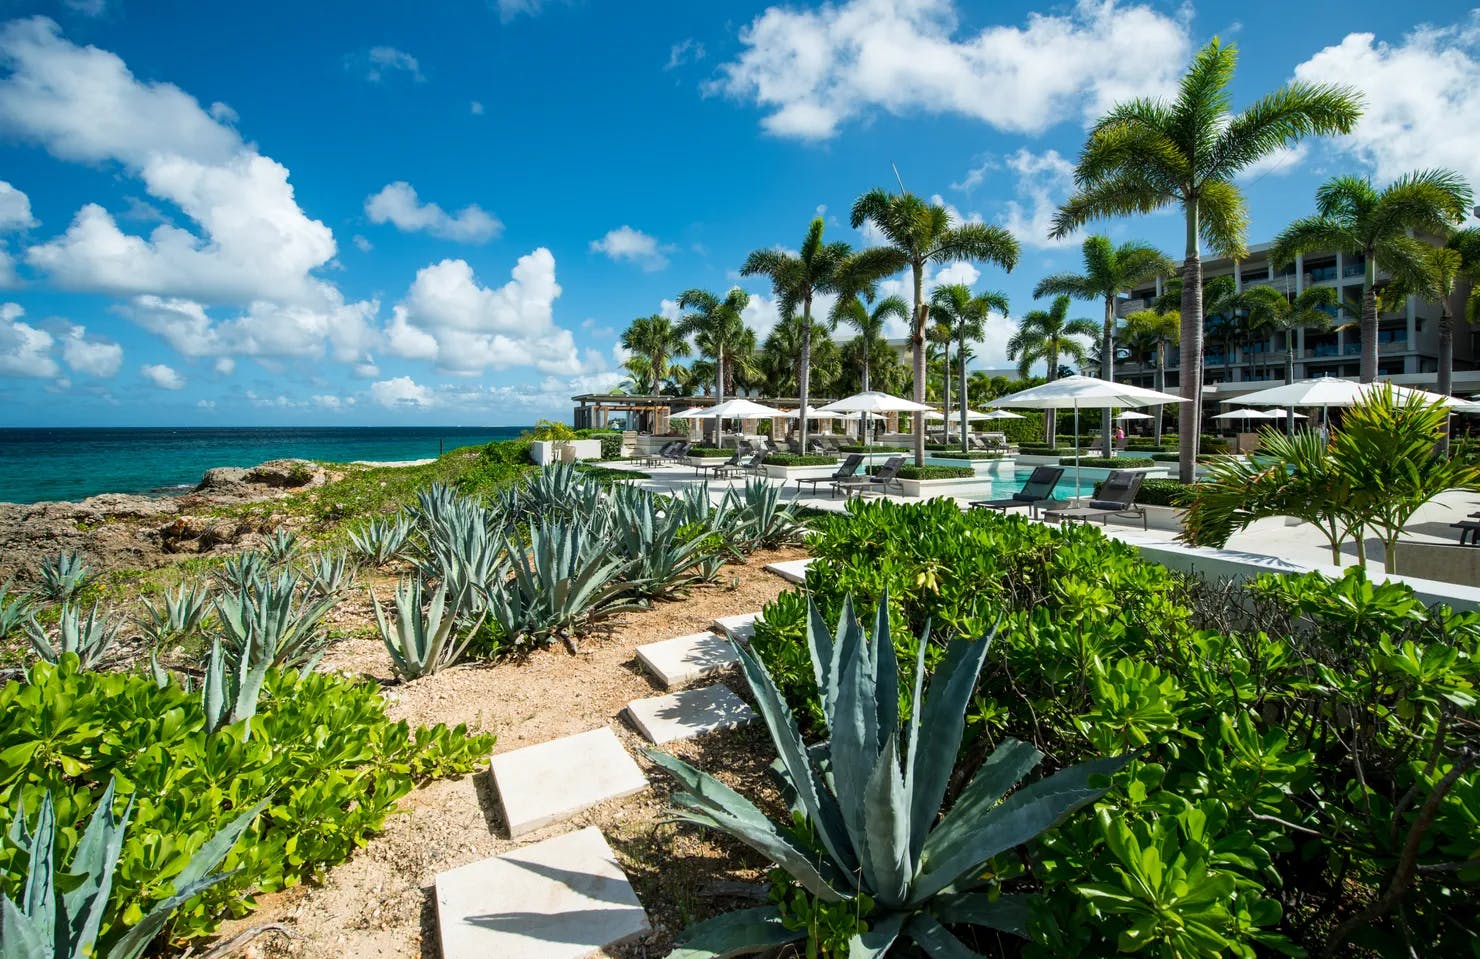 Four Season Resort pools and gardens over a cliffs with Barnes Bay view in Anguilla island, the Caribbean